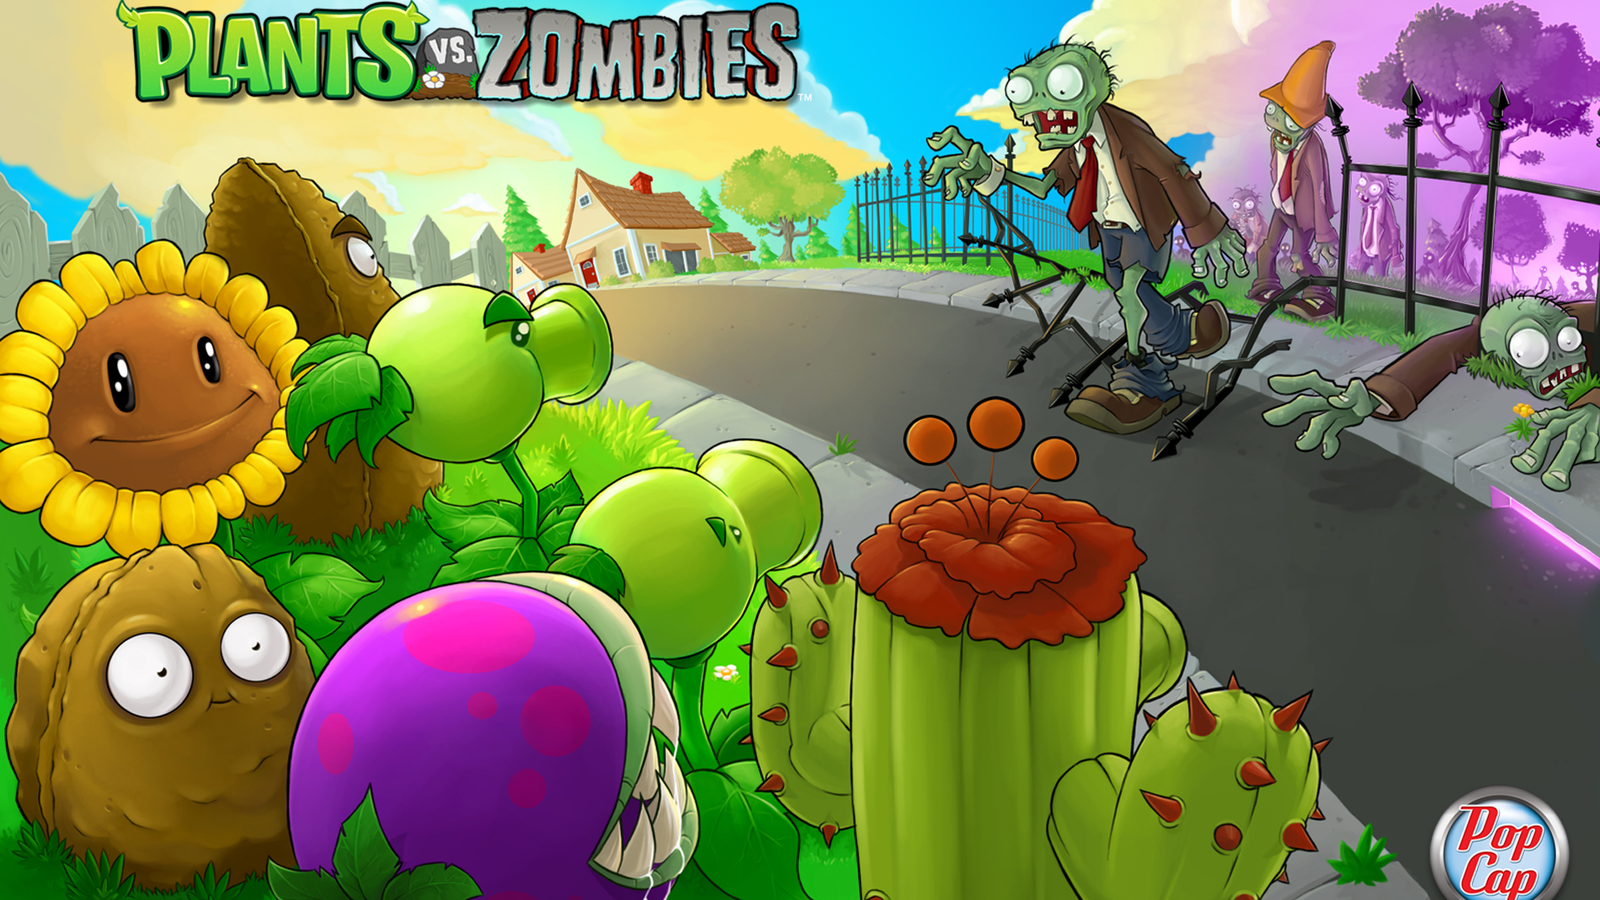 Plants vs. Zombies 2: 'The free-to-play model for this particular